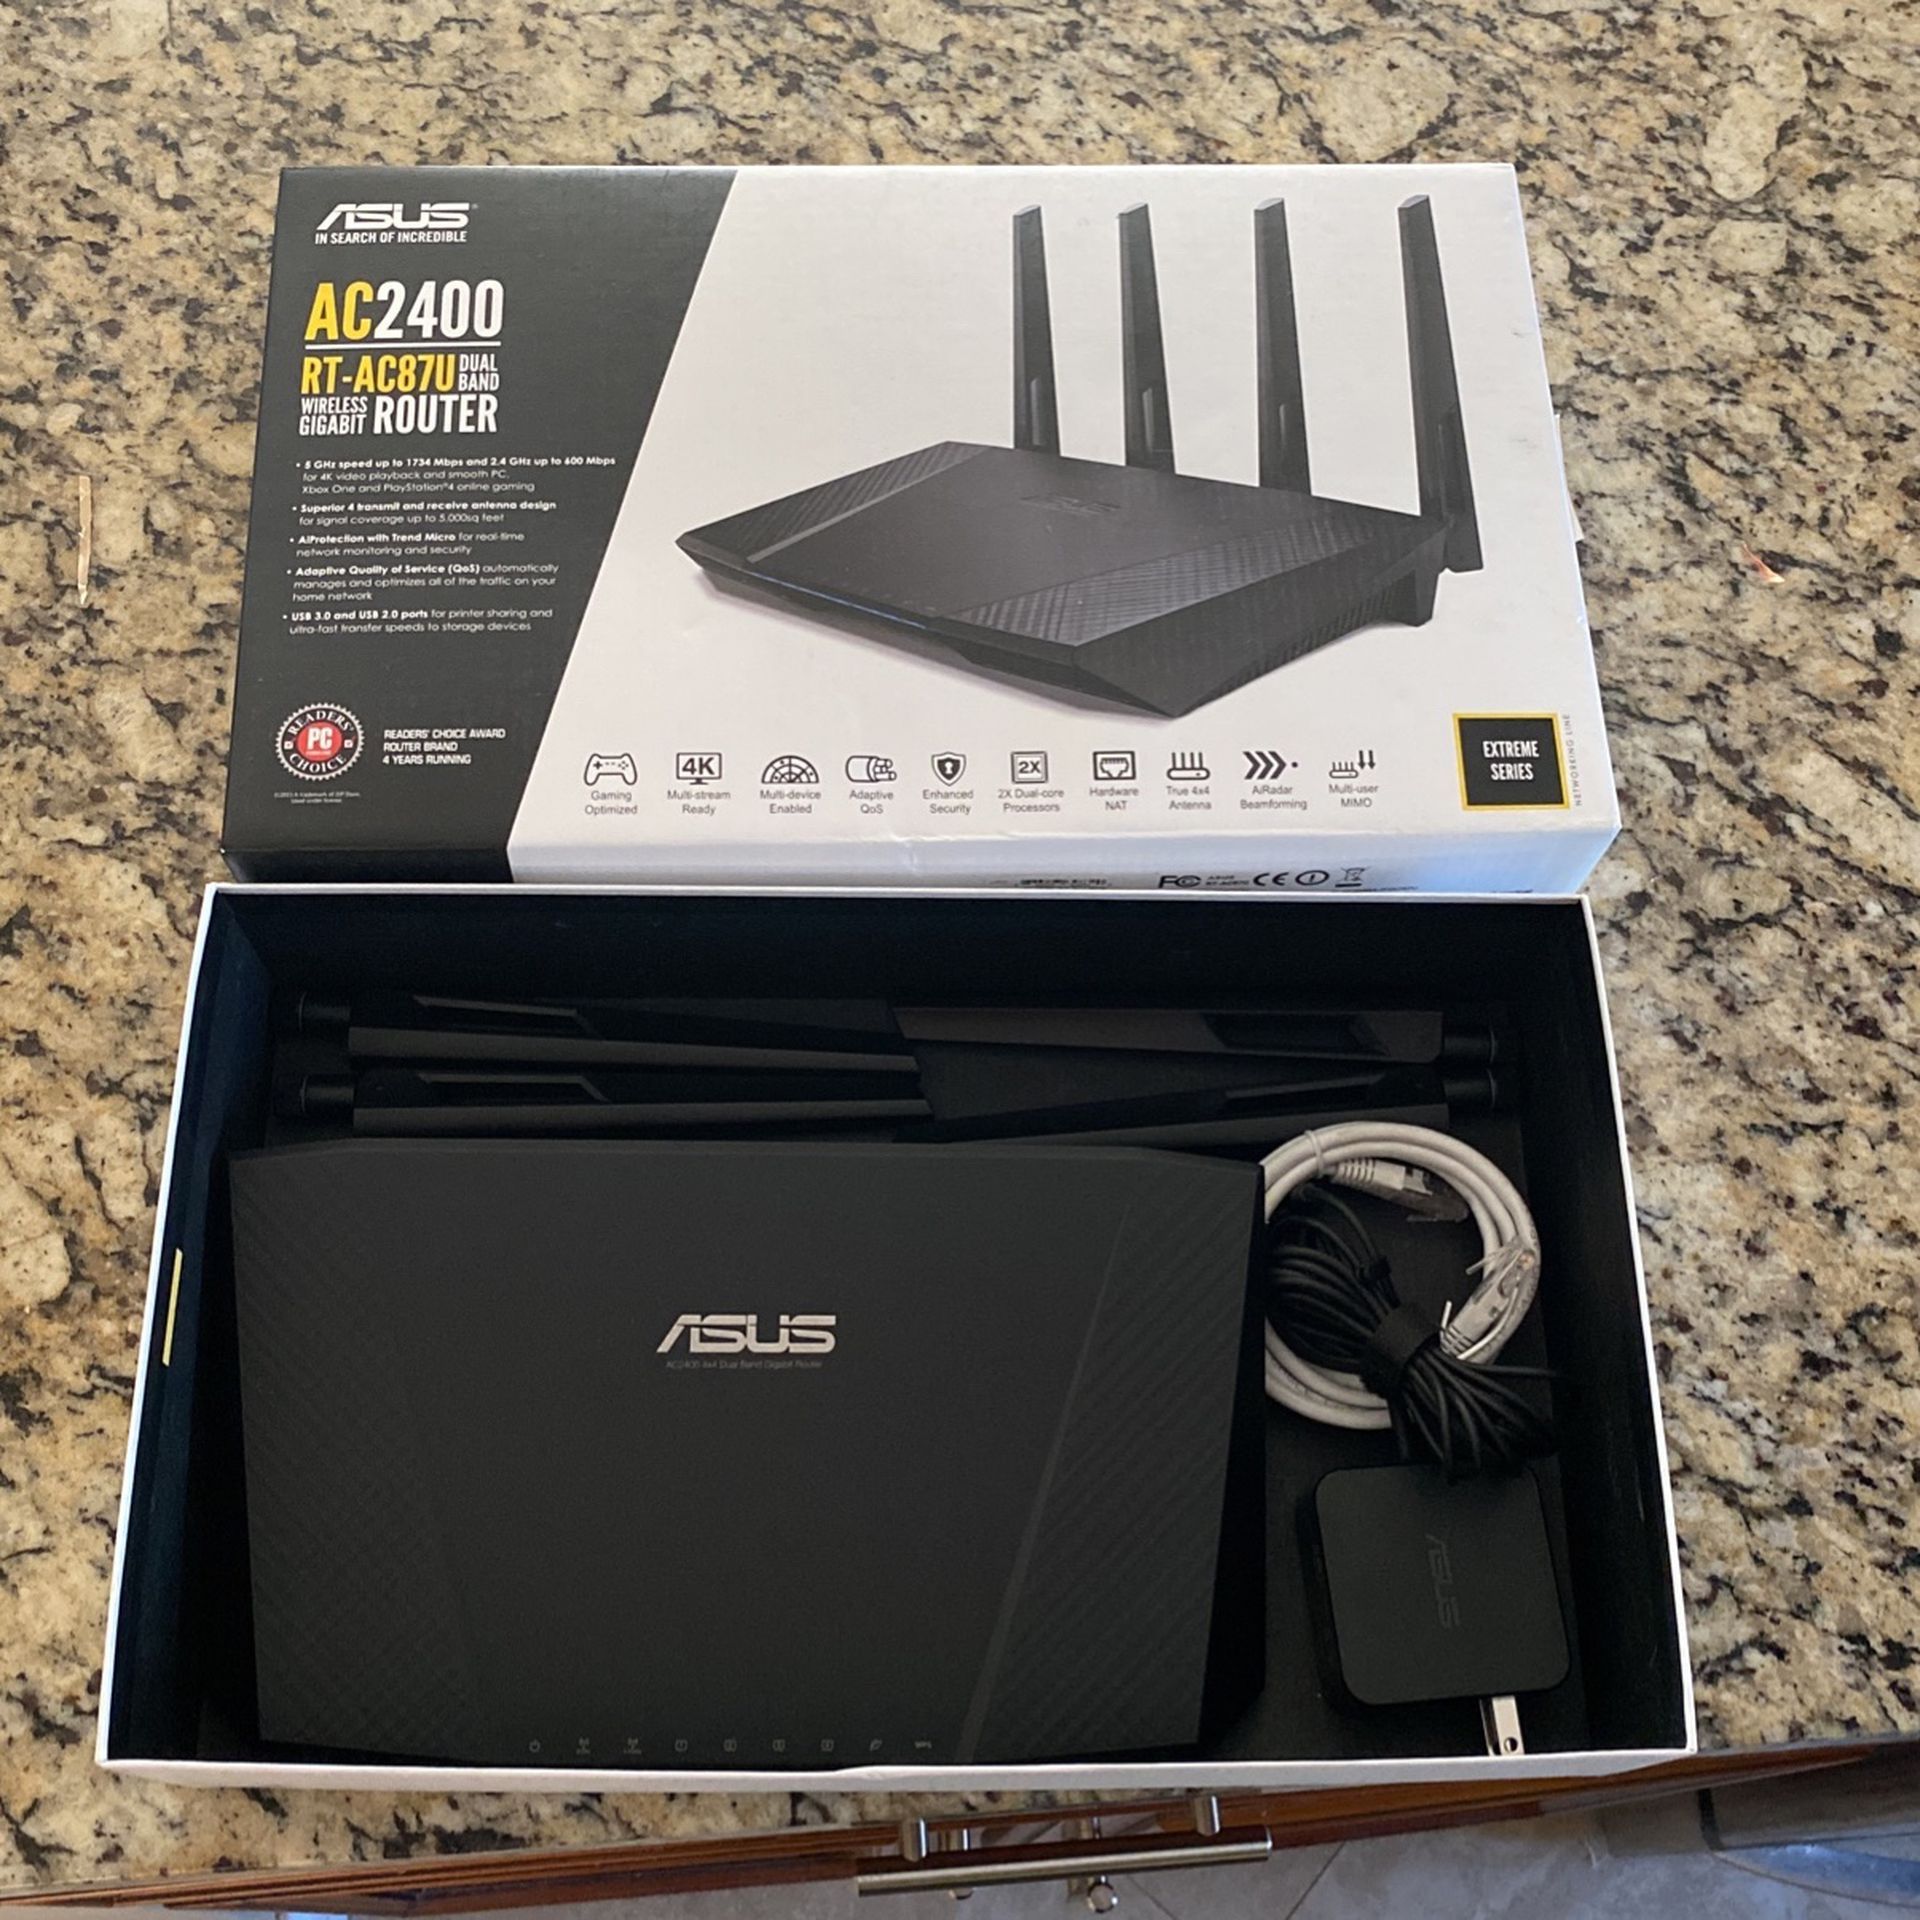 ASUS Wireless Gigabit Dual Band Wifi Router + Free Arris SB6121 Cable Modem